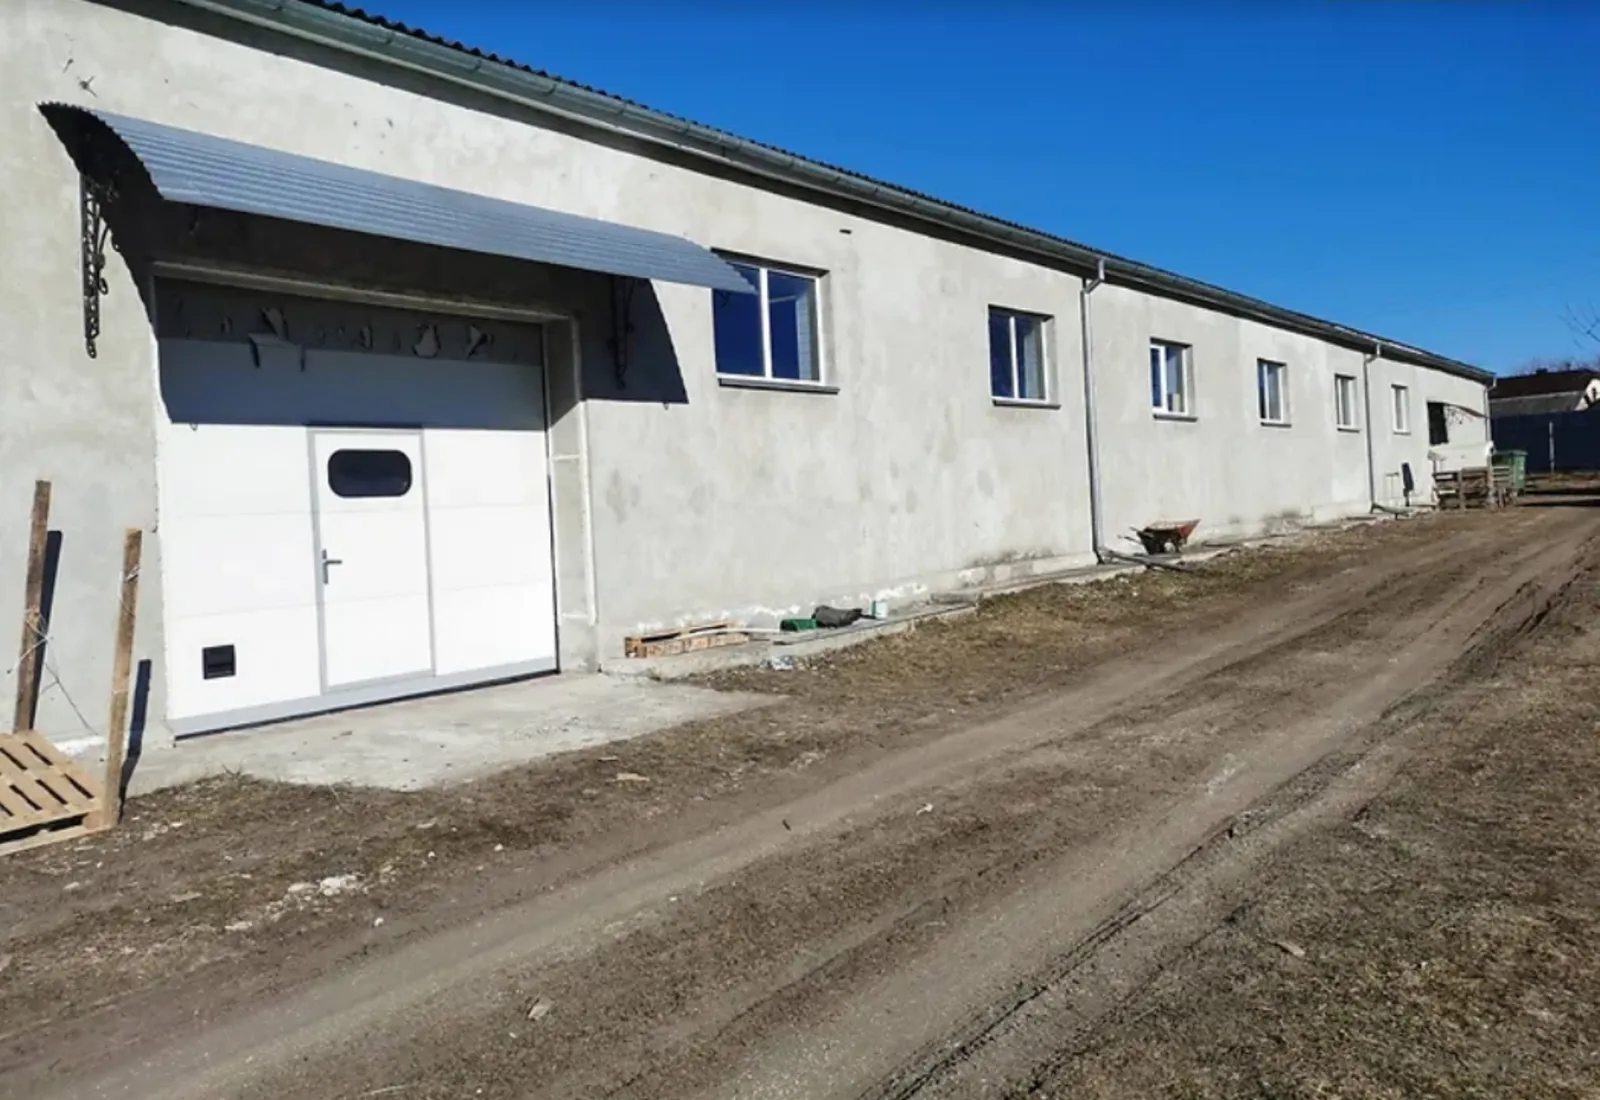 Real estate for sale for commercial purposes. 980 m², 1st floor/1 floor. Domamorych. 